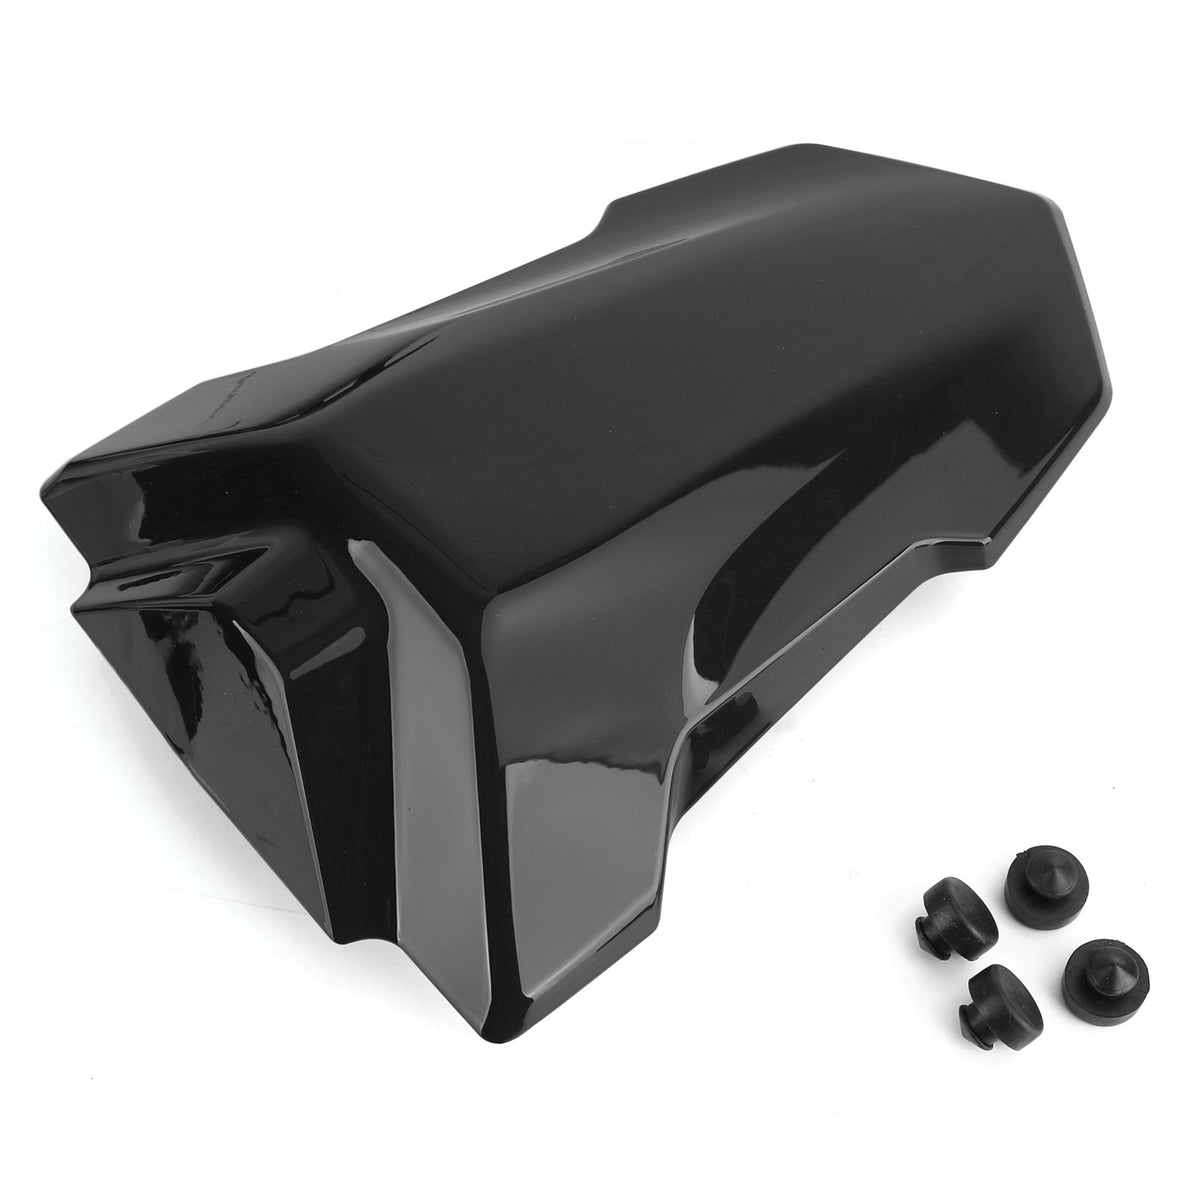 19-22 BMW S1000RR Black Motorcycle Rear Seat Cover Tail Cowl Fairing